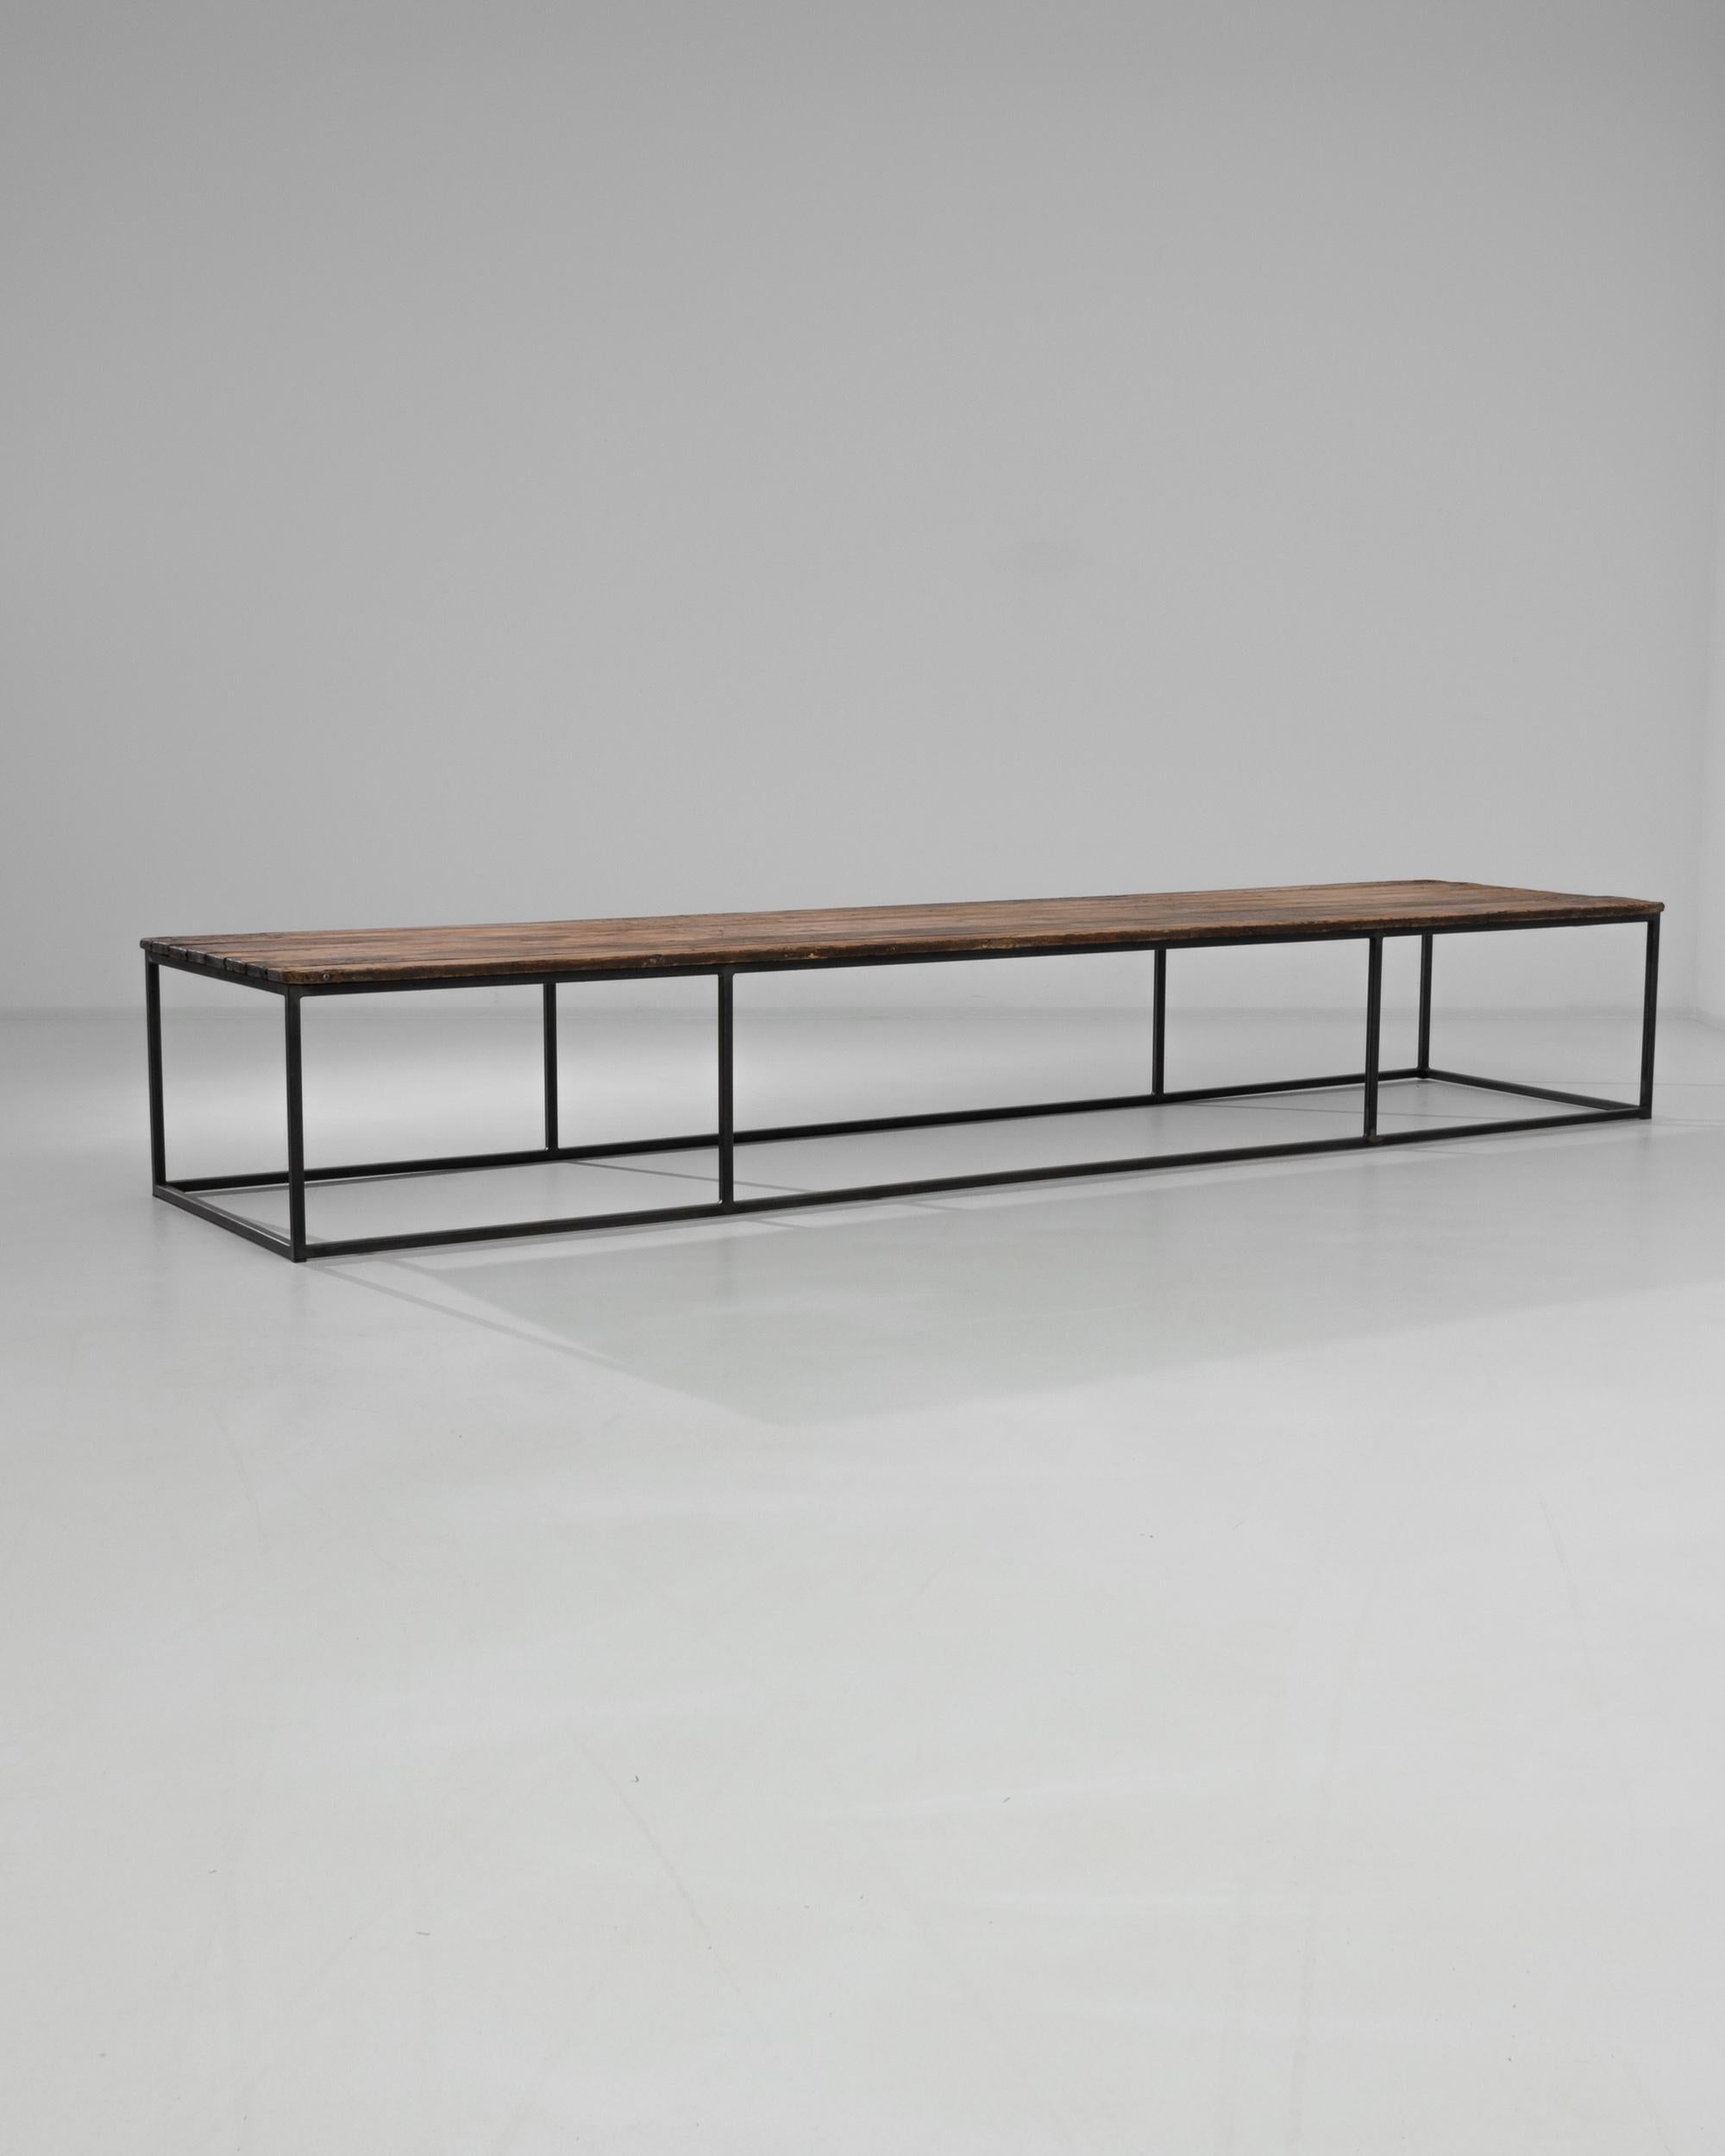 Wooden planks from France, circa 1950, rest on a steel base. Blending sleek and rustic, this 18” tall coffee table makes a comfortable and stylish place to rest your drink. Simple symmetry sings in this handcrafted table featuring a minimal metal